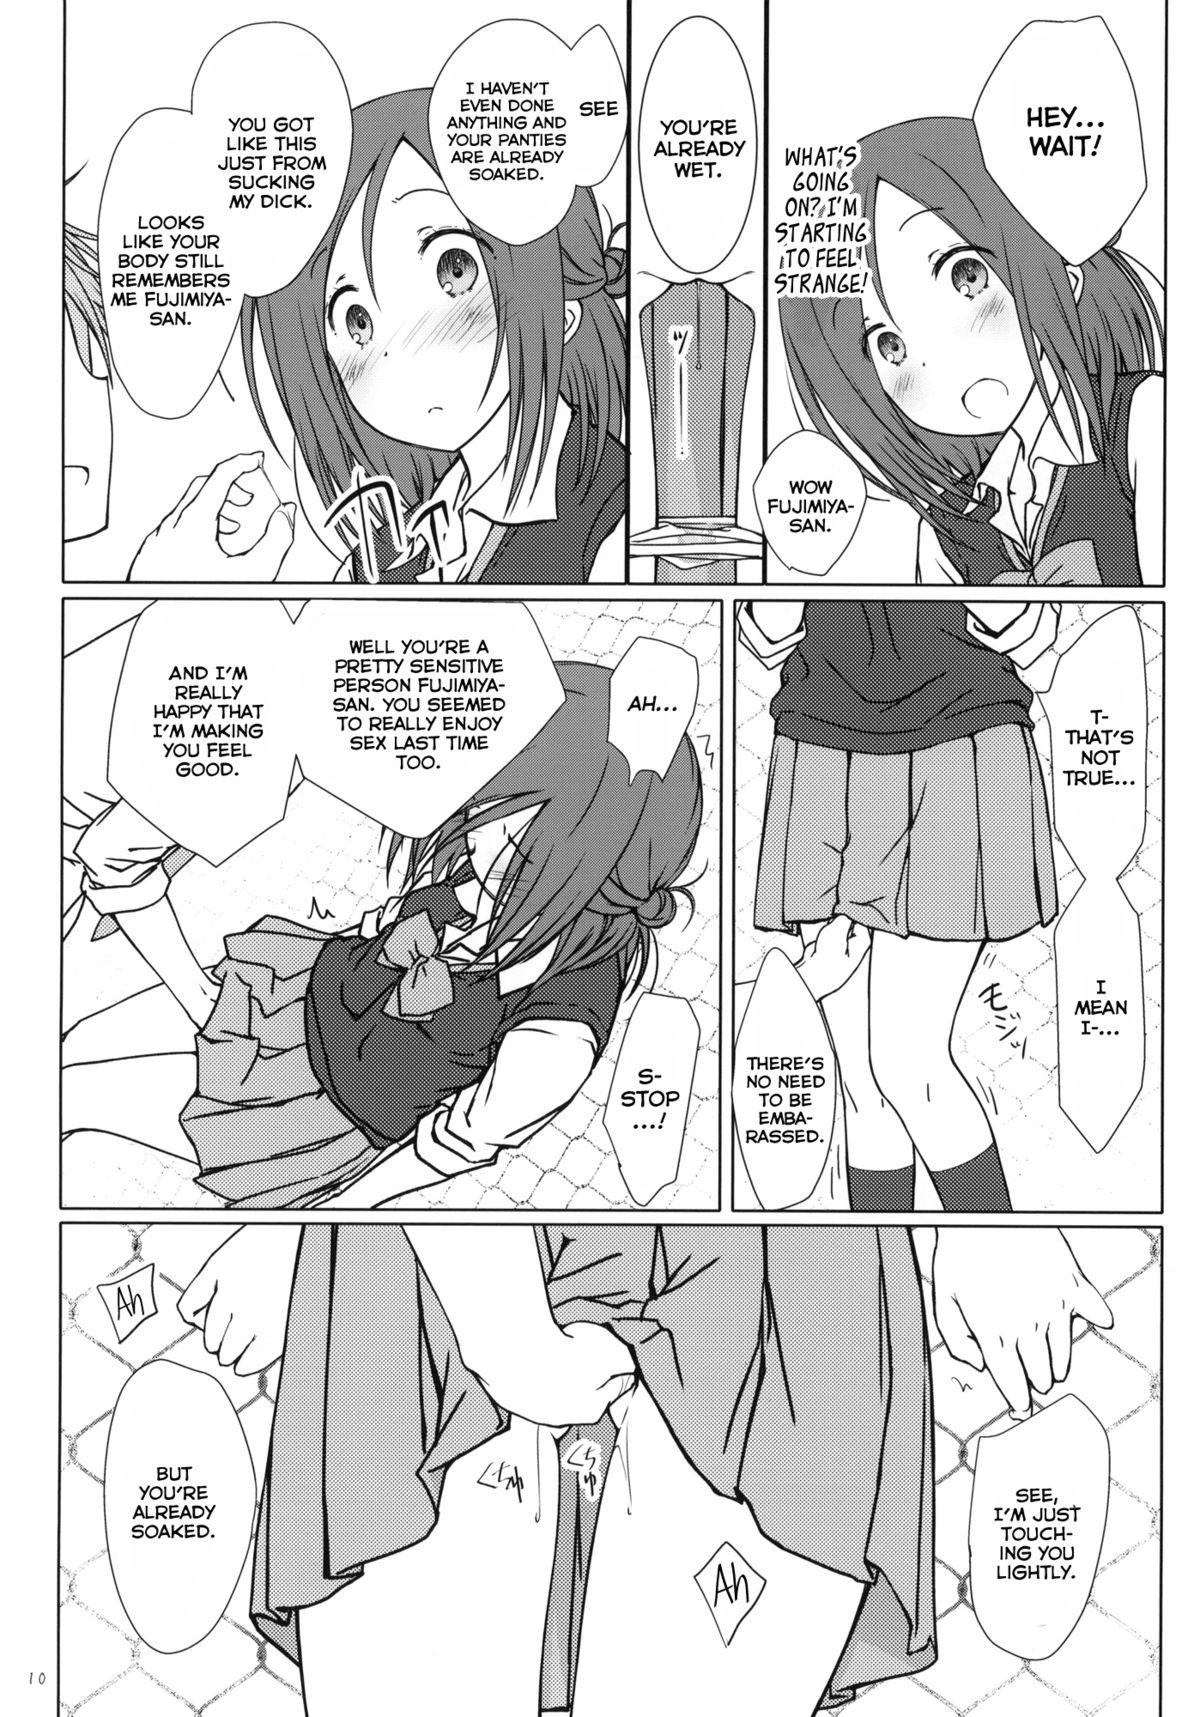 Caliente "Tomodachi to no Sex." - One week friends Massage Creep - Page 9